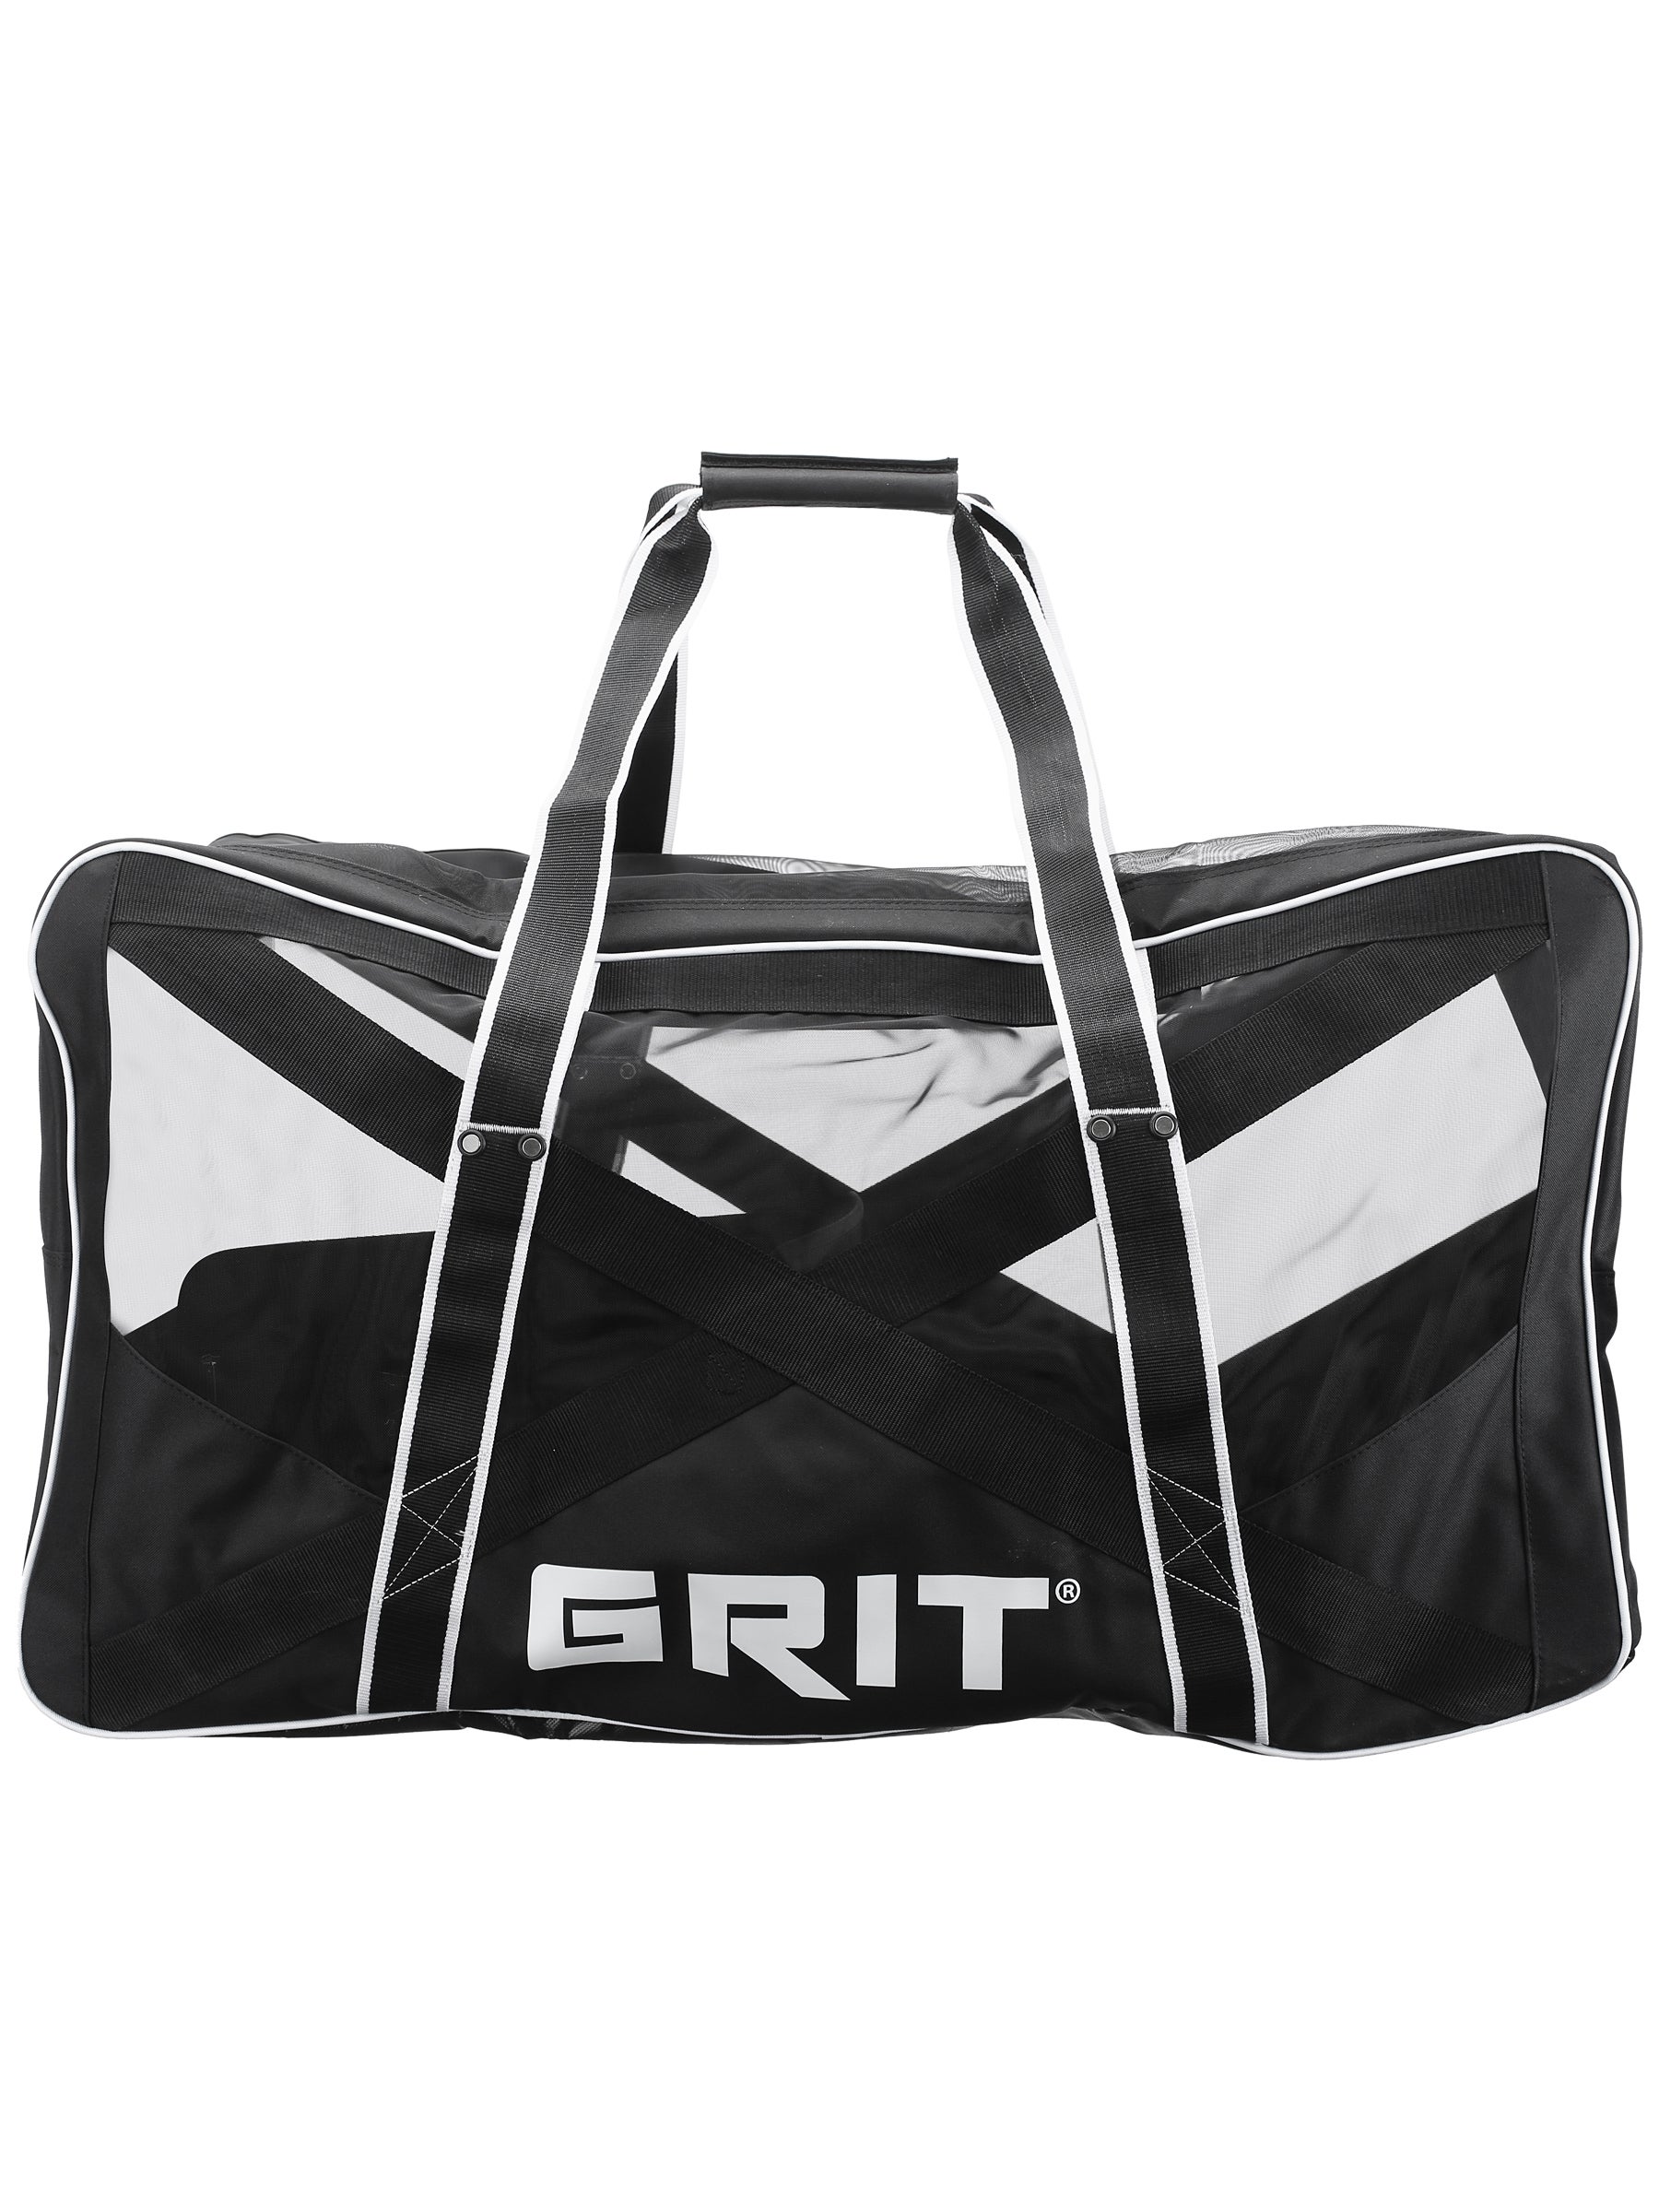 GRIT Airbox Hockey Equipment Carry Bag 36 inch Toronto Blue/White NEW 